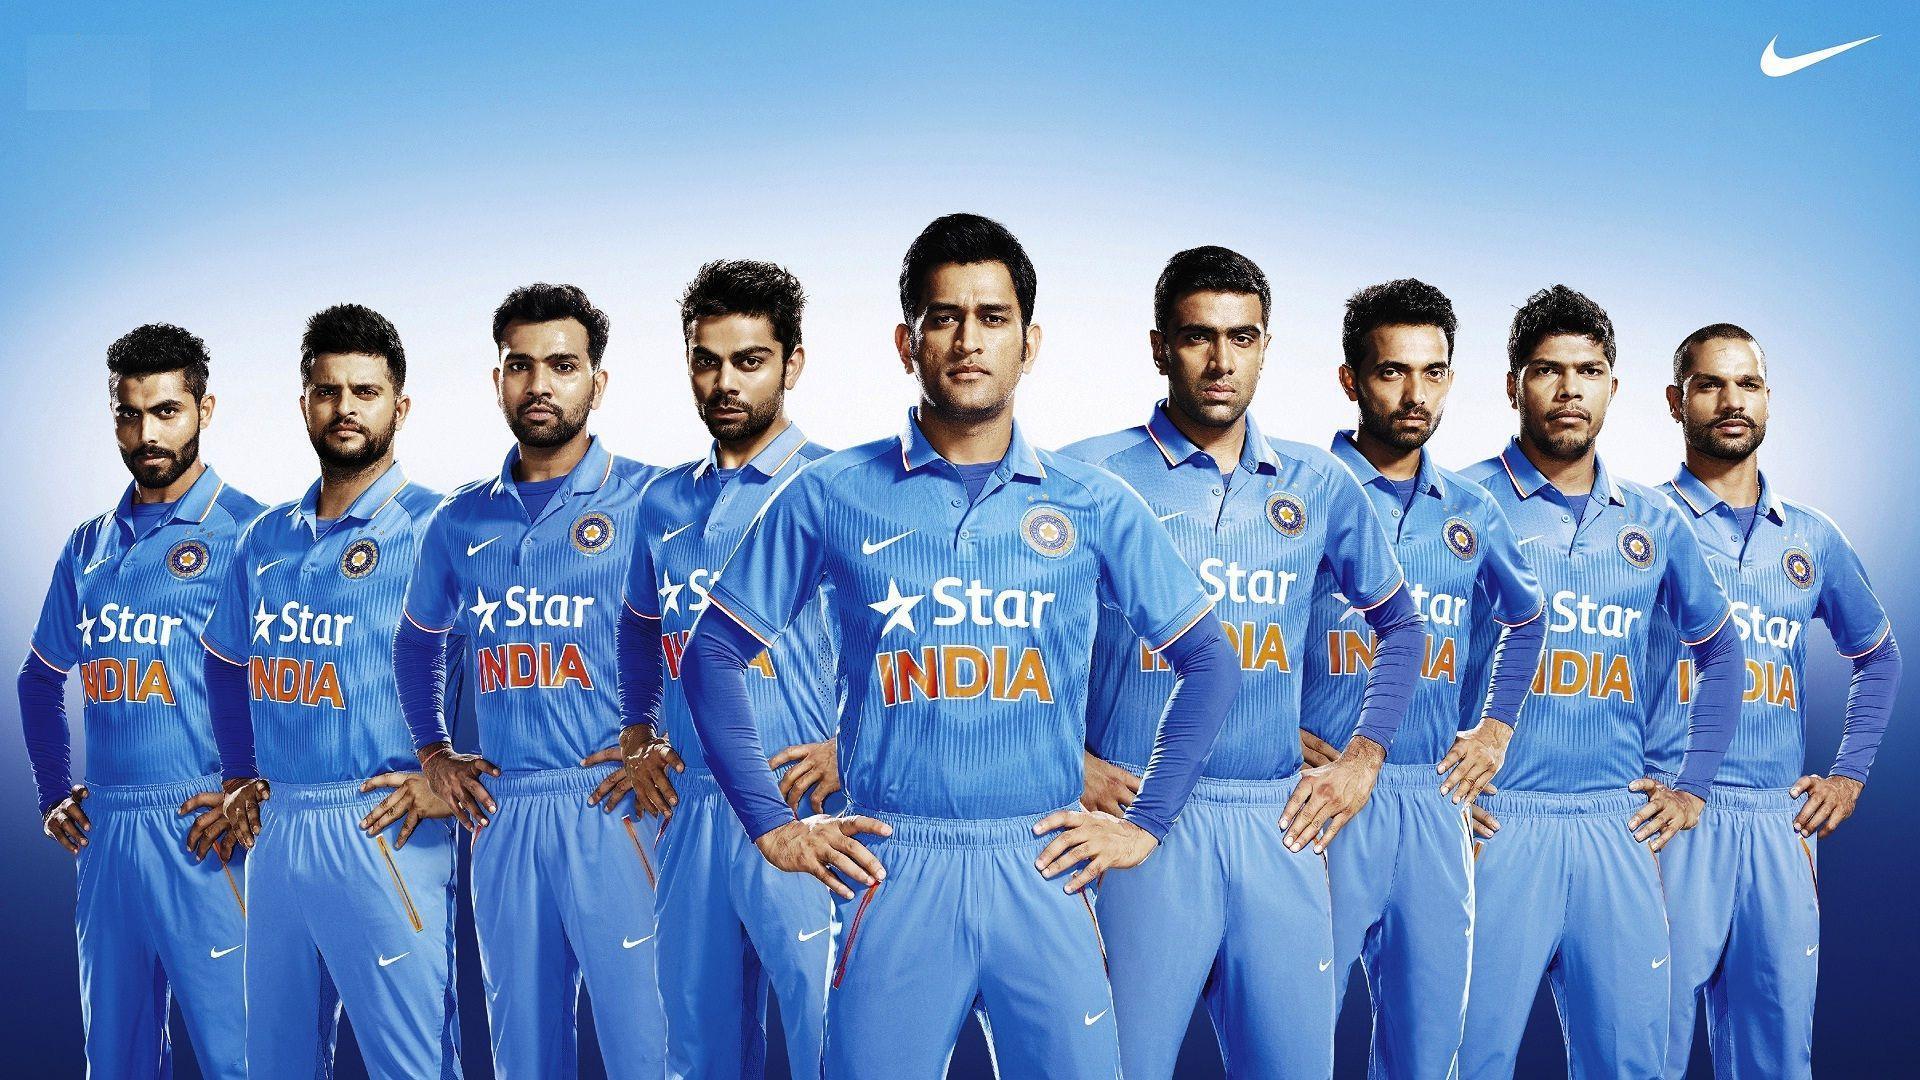 M S Dhoni with Indian cricket team wallpapers